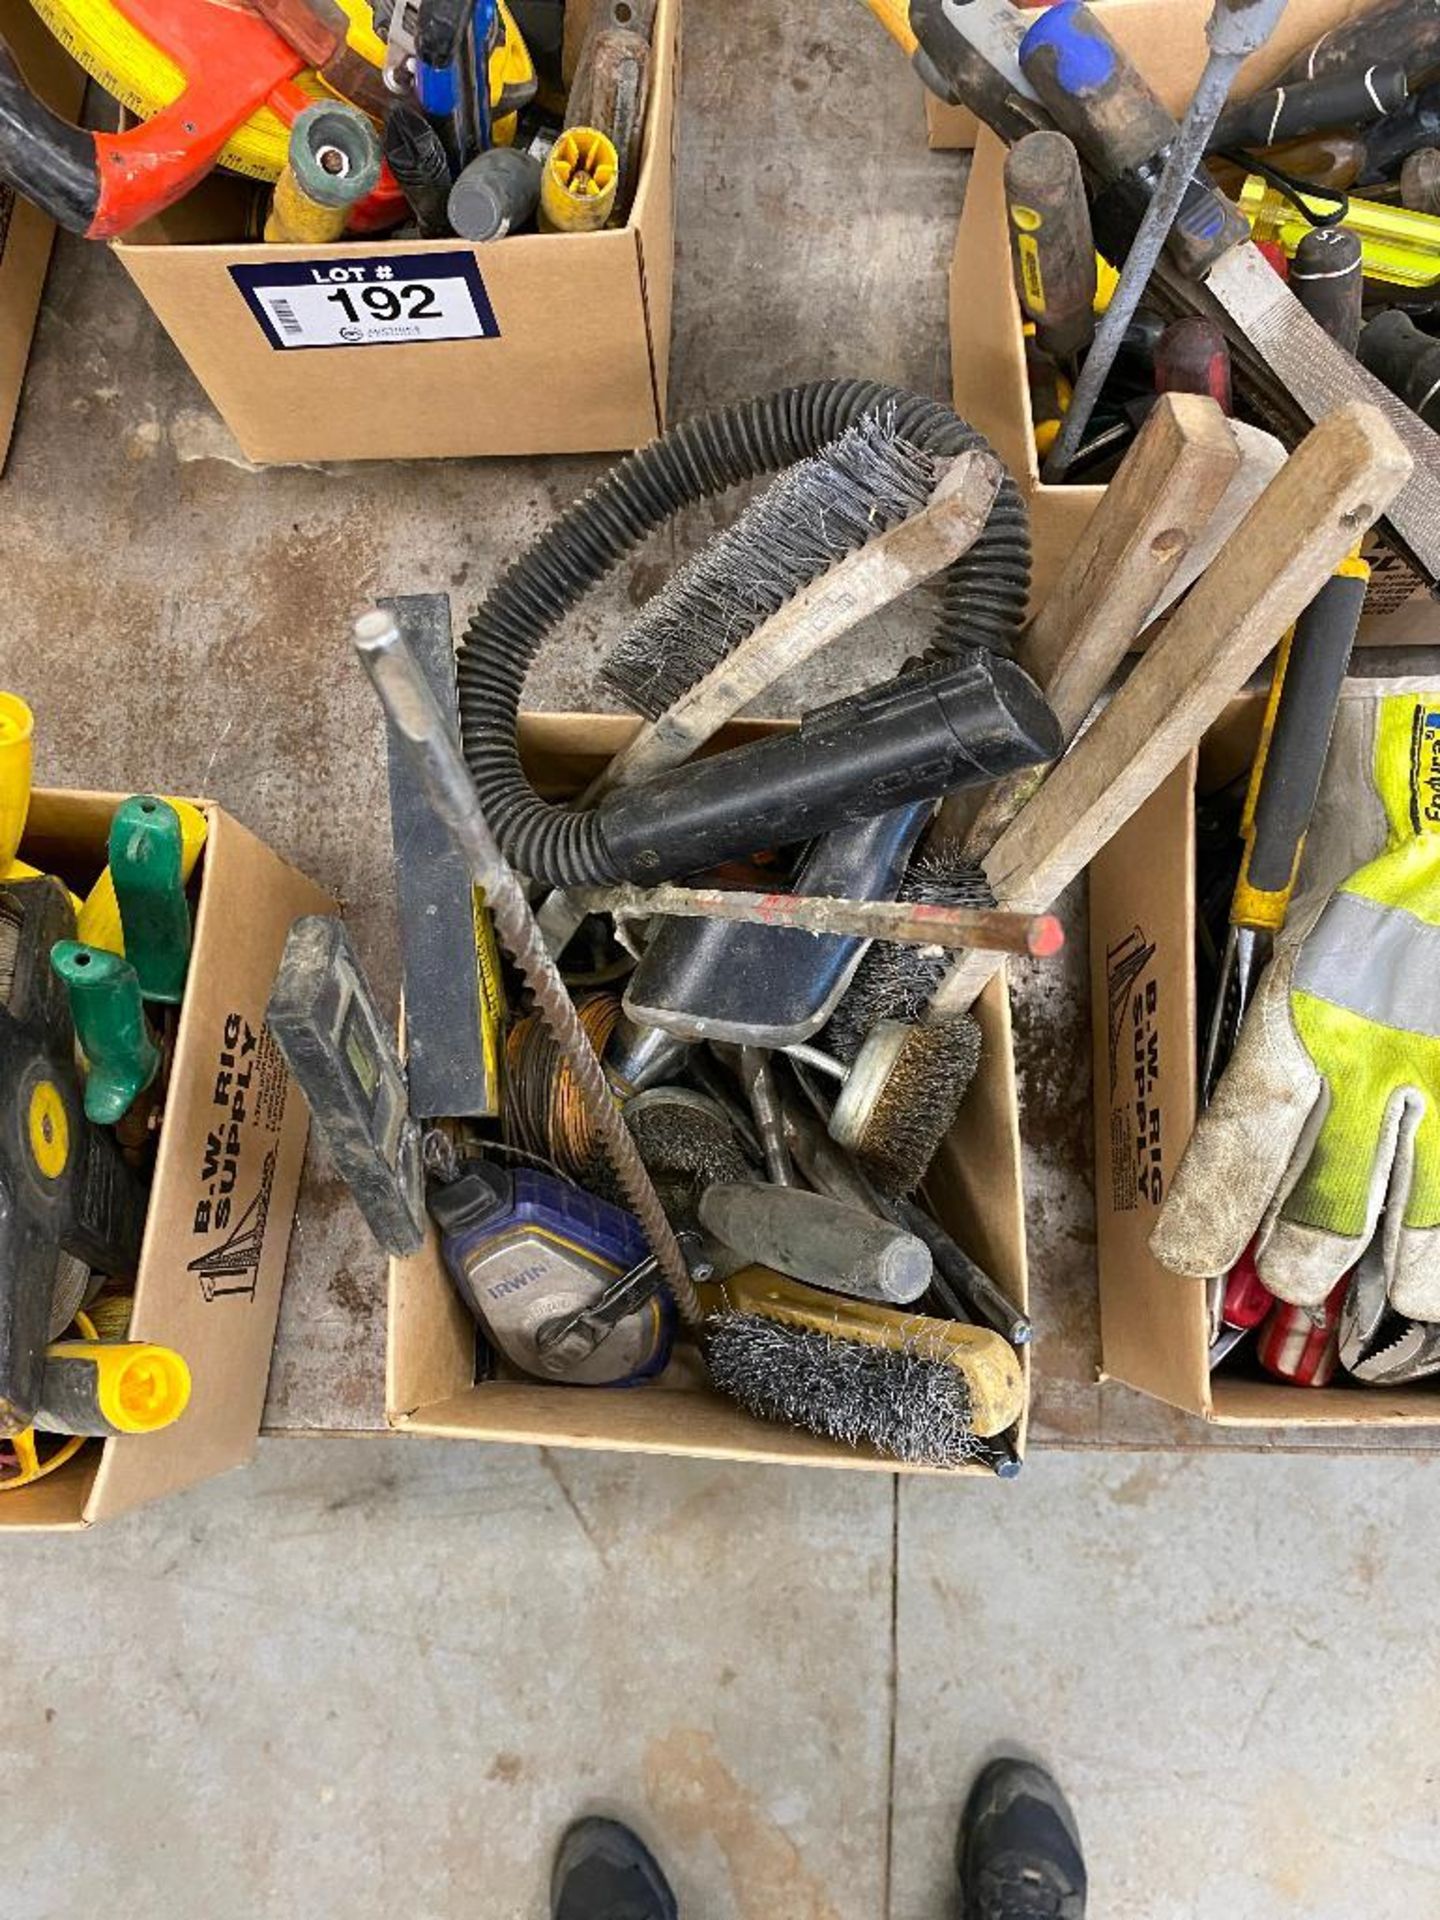 Lot of Asst. Wire Brushes, Drill Bits, etc. - Image 3 of 4